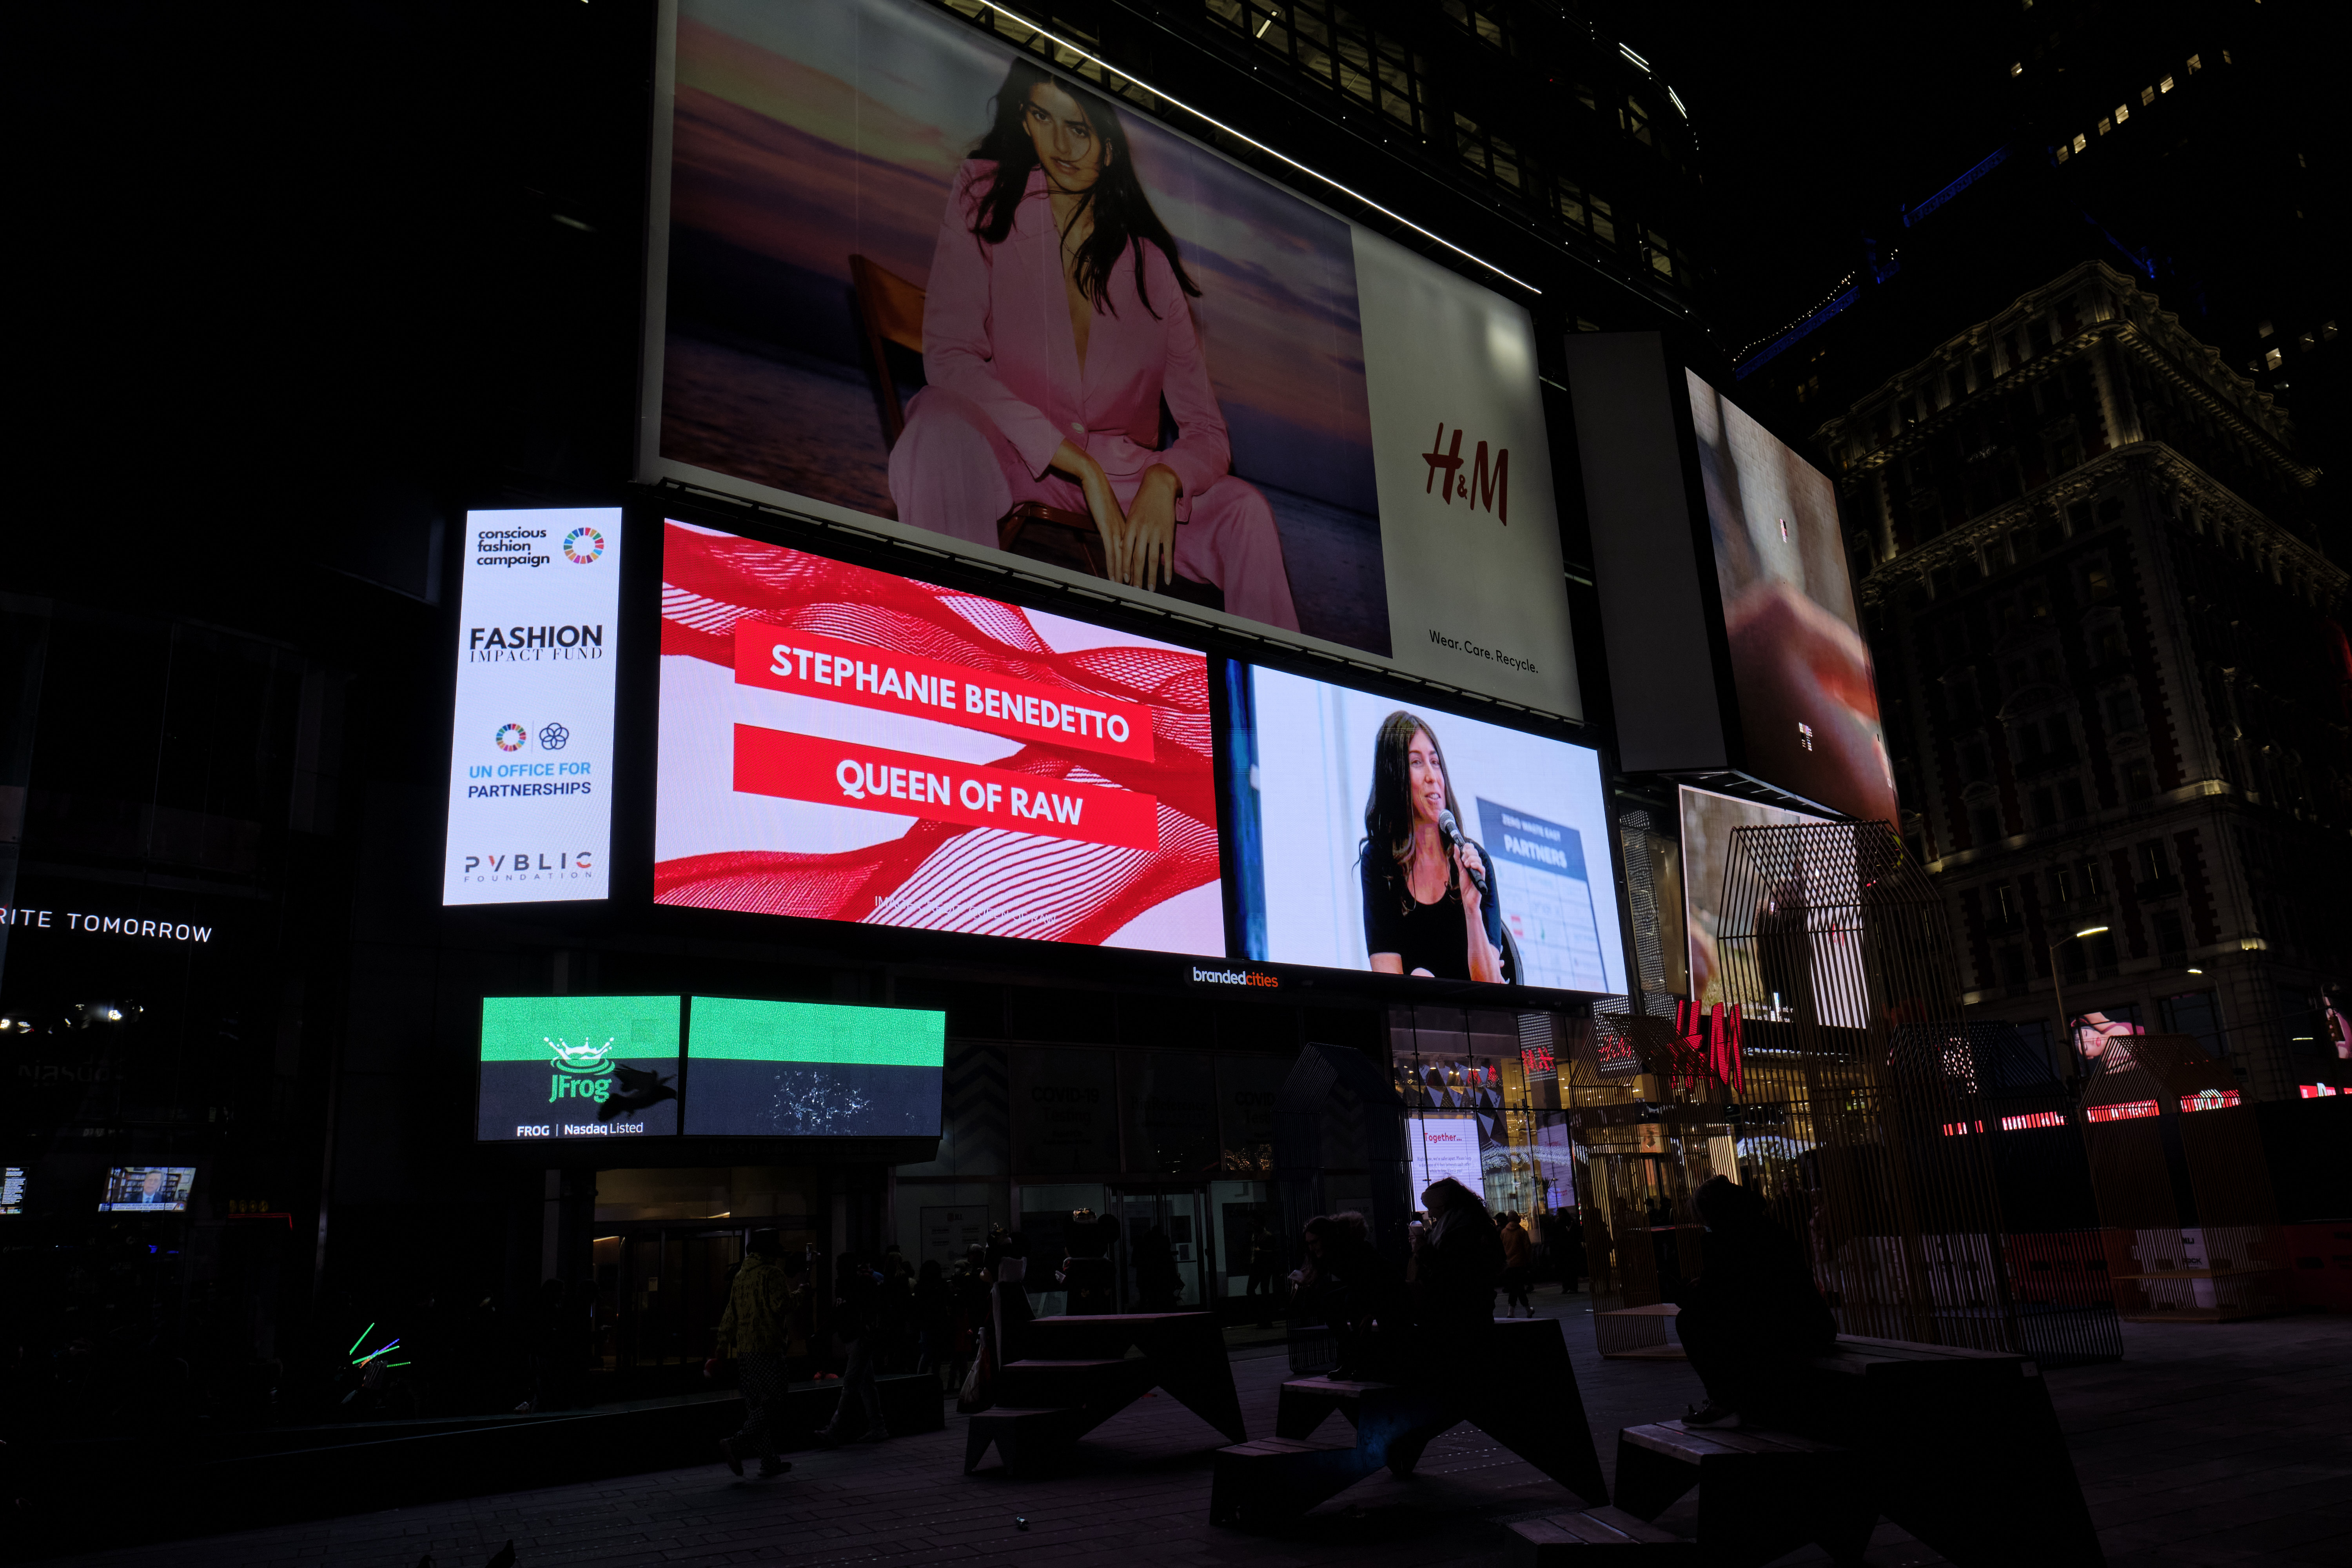 Conscious Fashion Campaign: New York | Stephanie Benedetto, Founder and CEO, Queen of Raw on the NYC Broadway Plaza Billboard